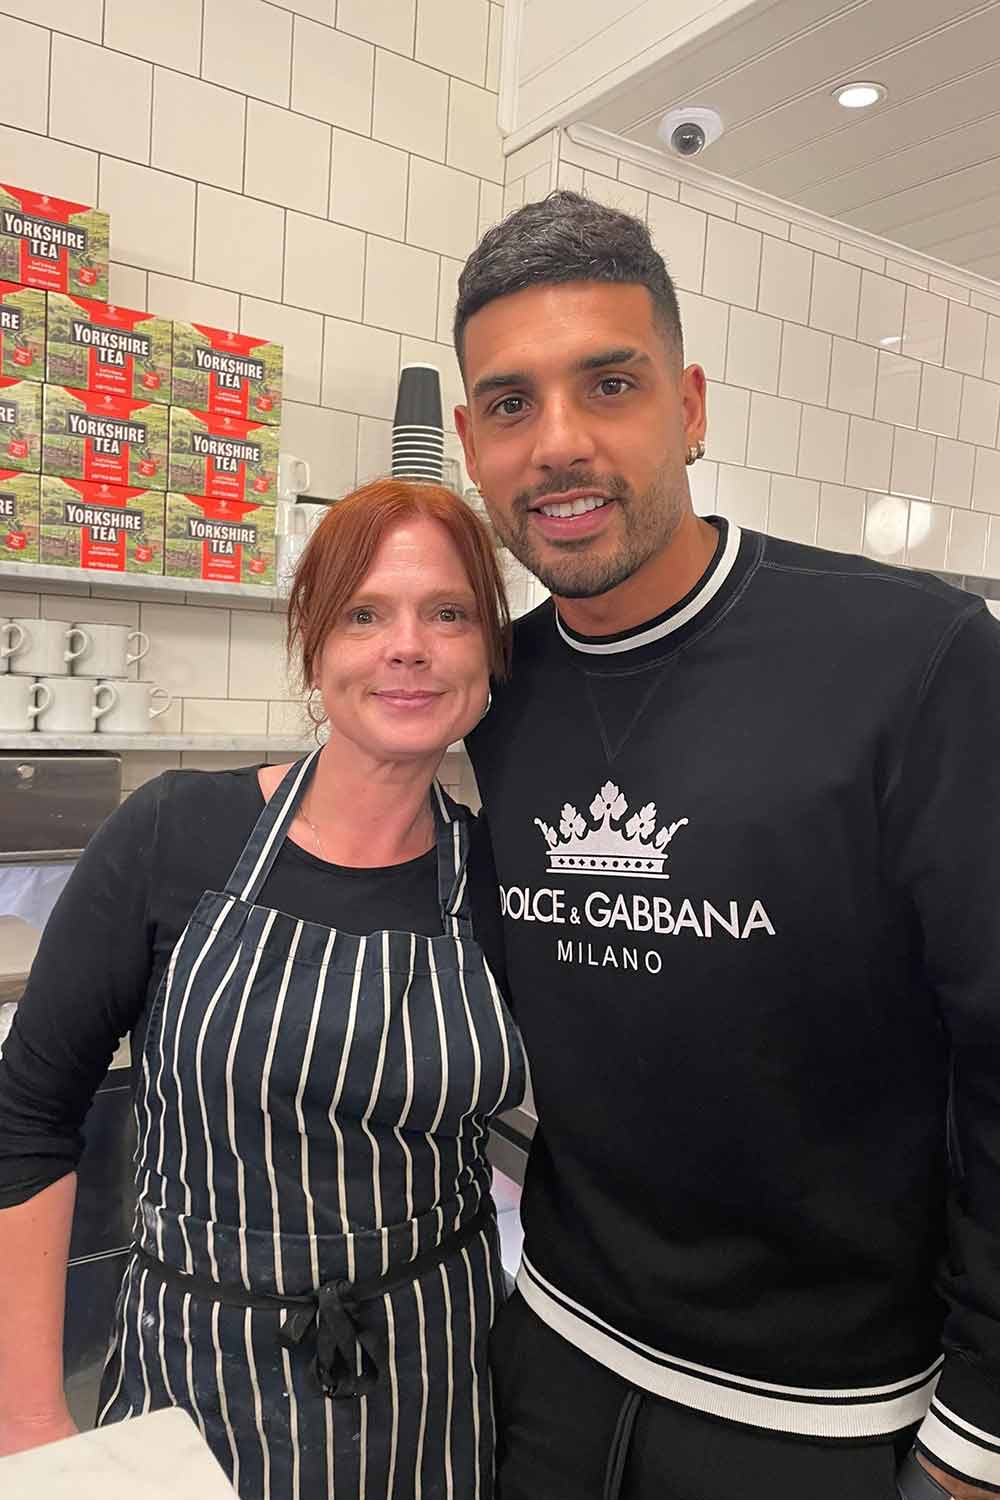 West ham footballer Emerson Palmieri and G Kelly employee Leanne in G Kelly pie and mash shop on Roman Road